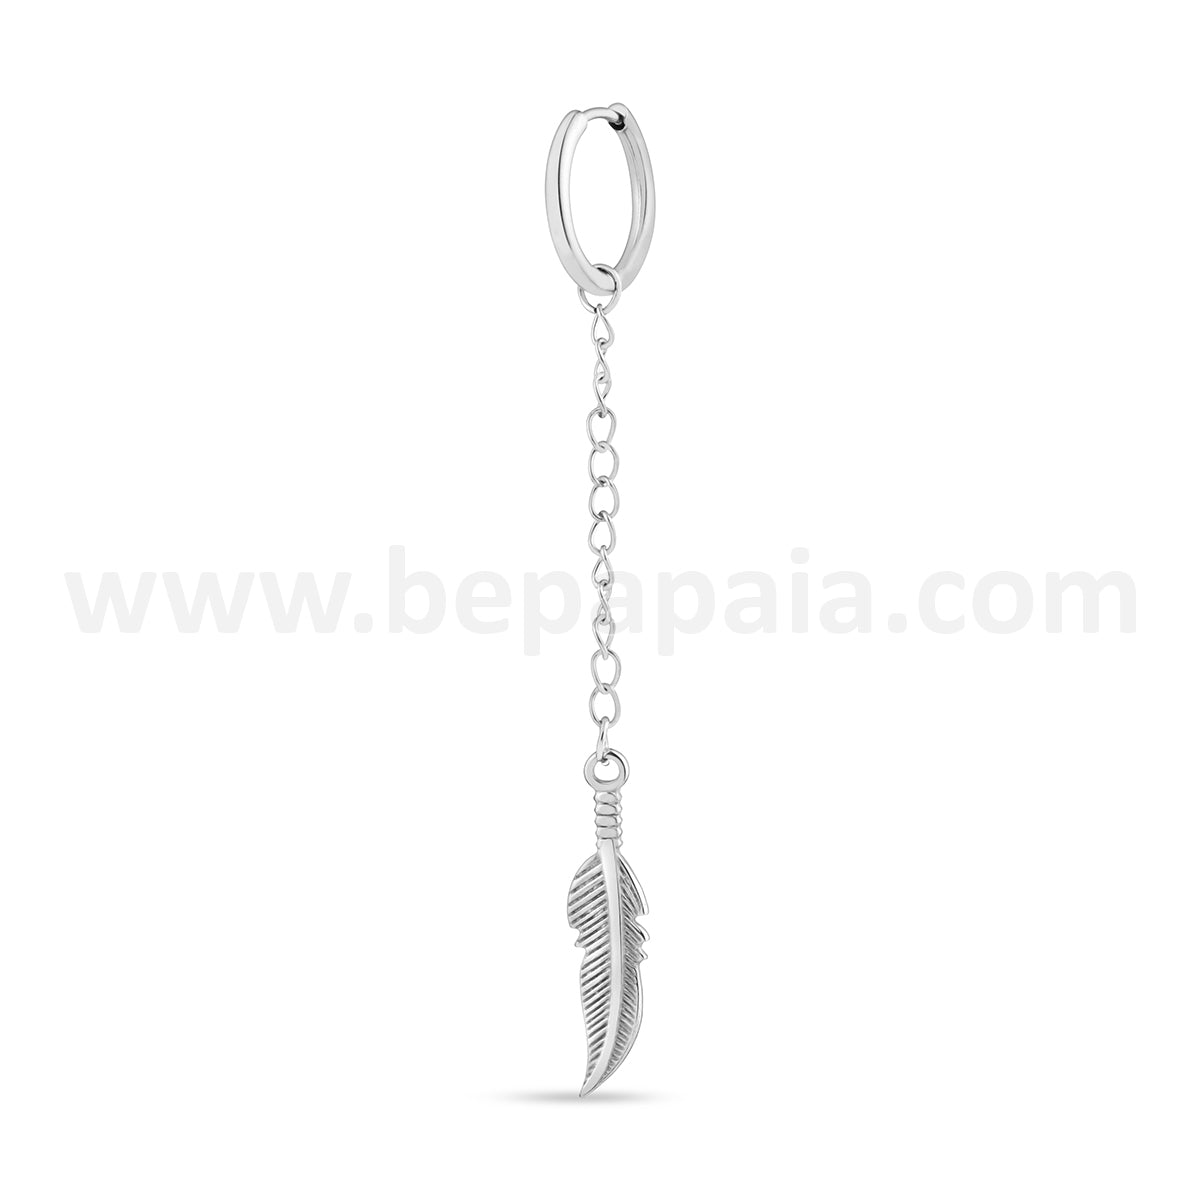 Hoop earring with chain and feather